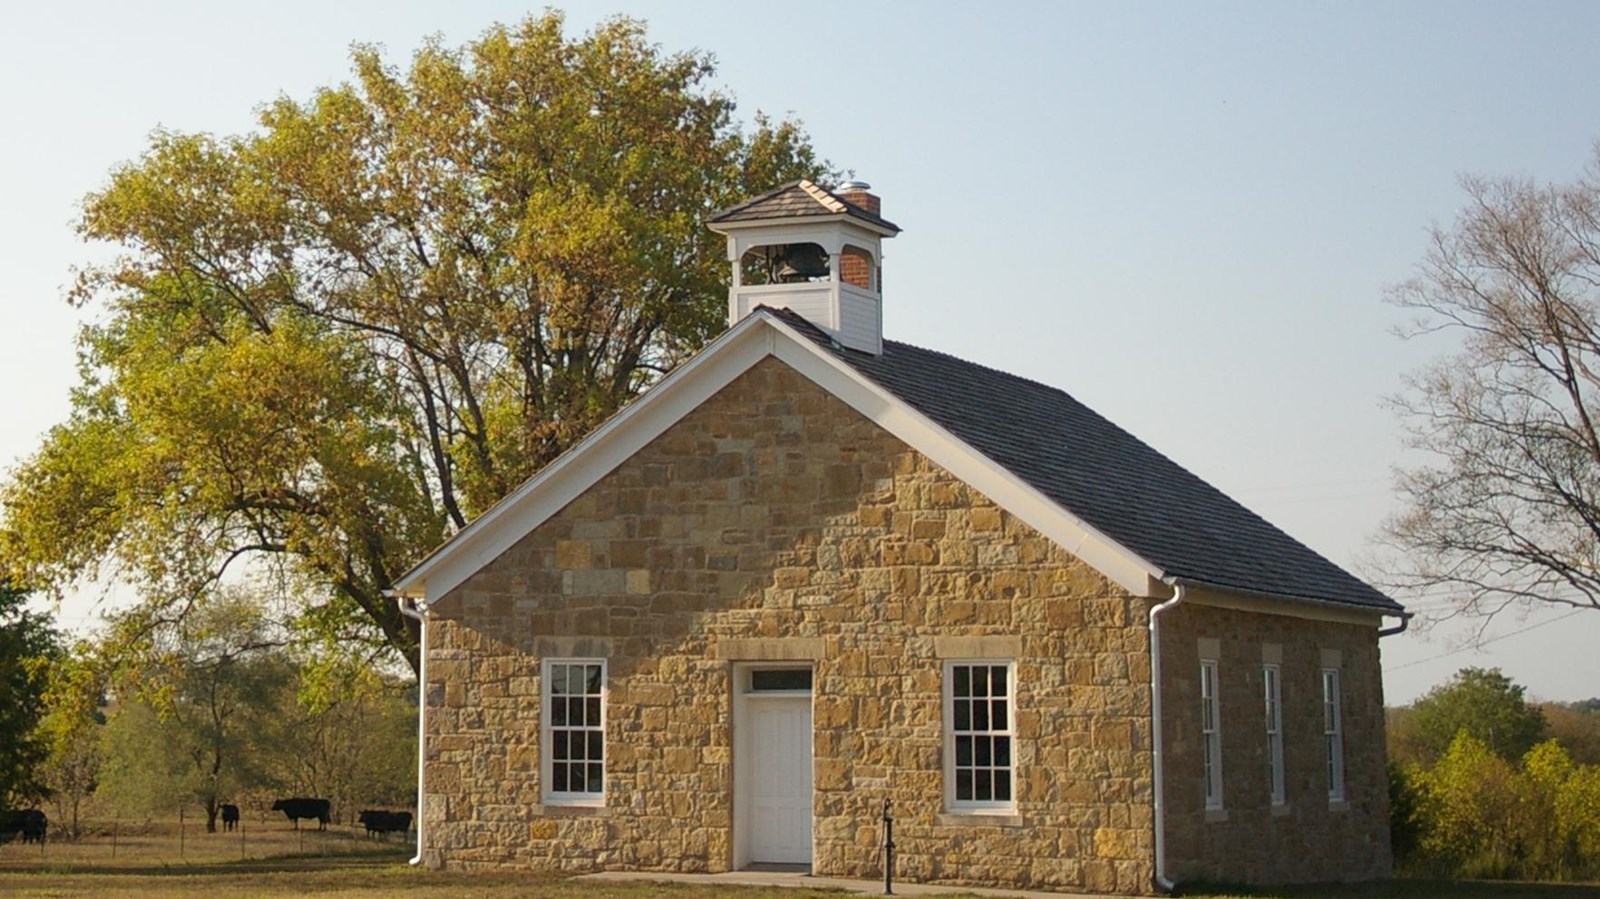 A stone one room school house.